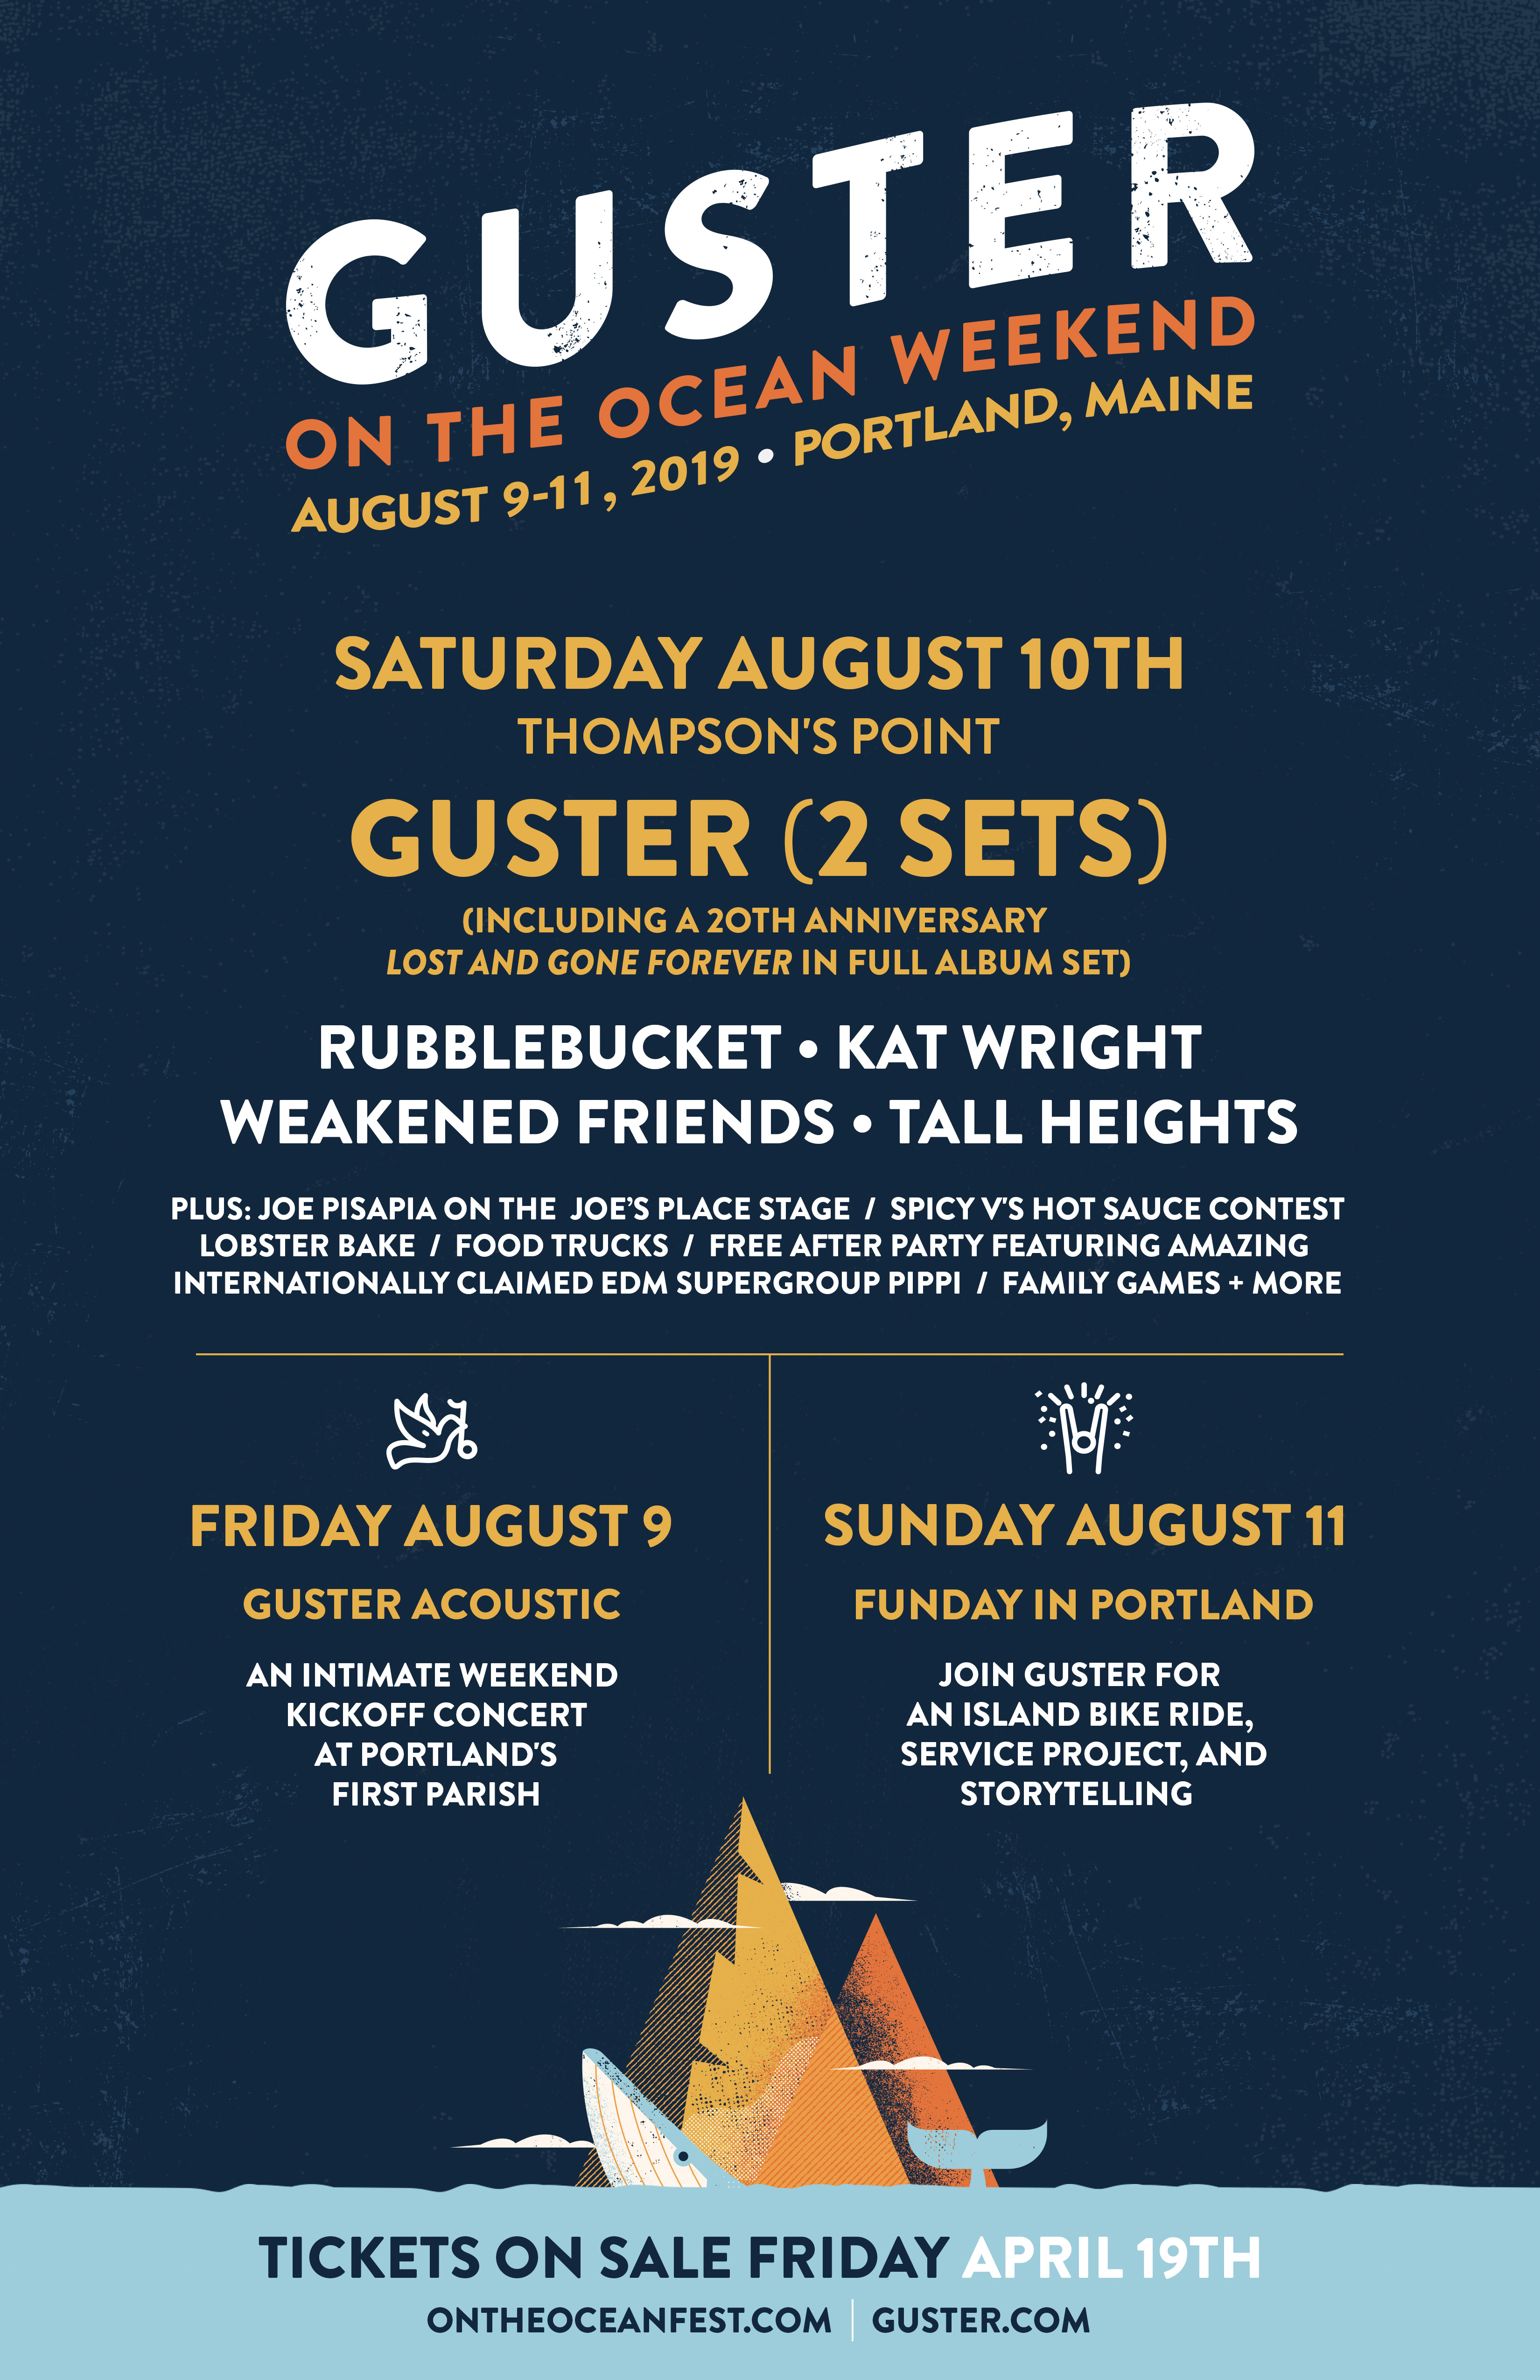 Guster announces Third Annual On The Ocean Weekend